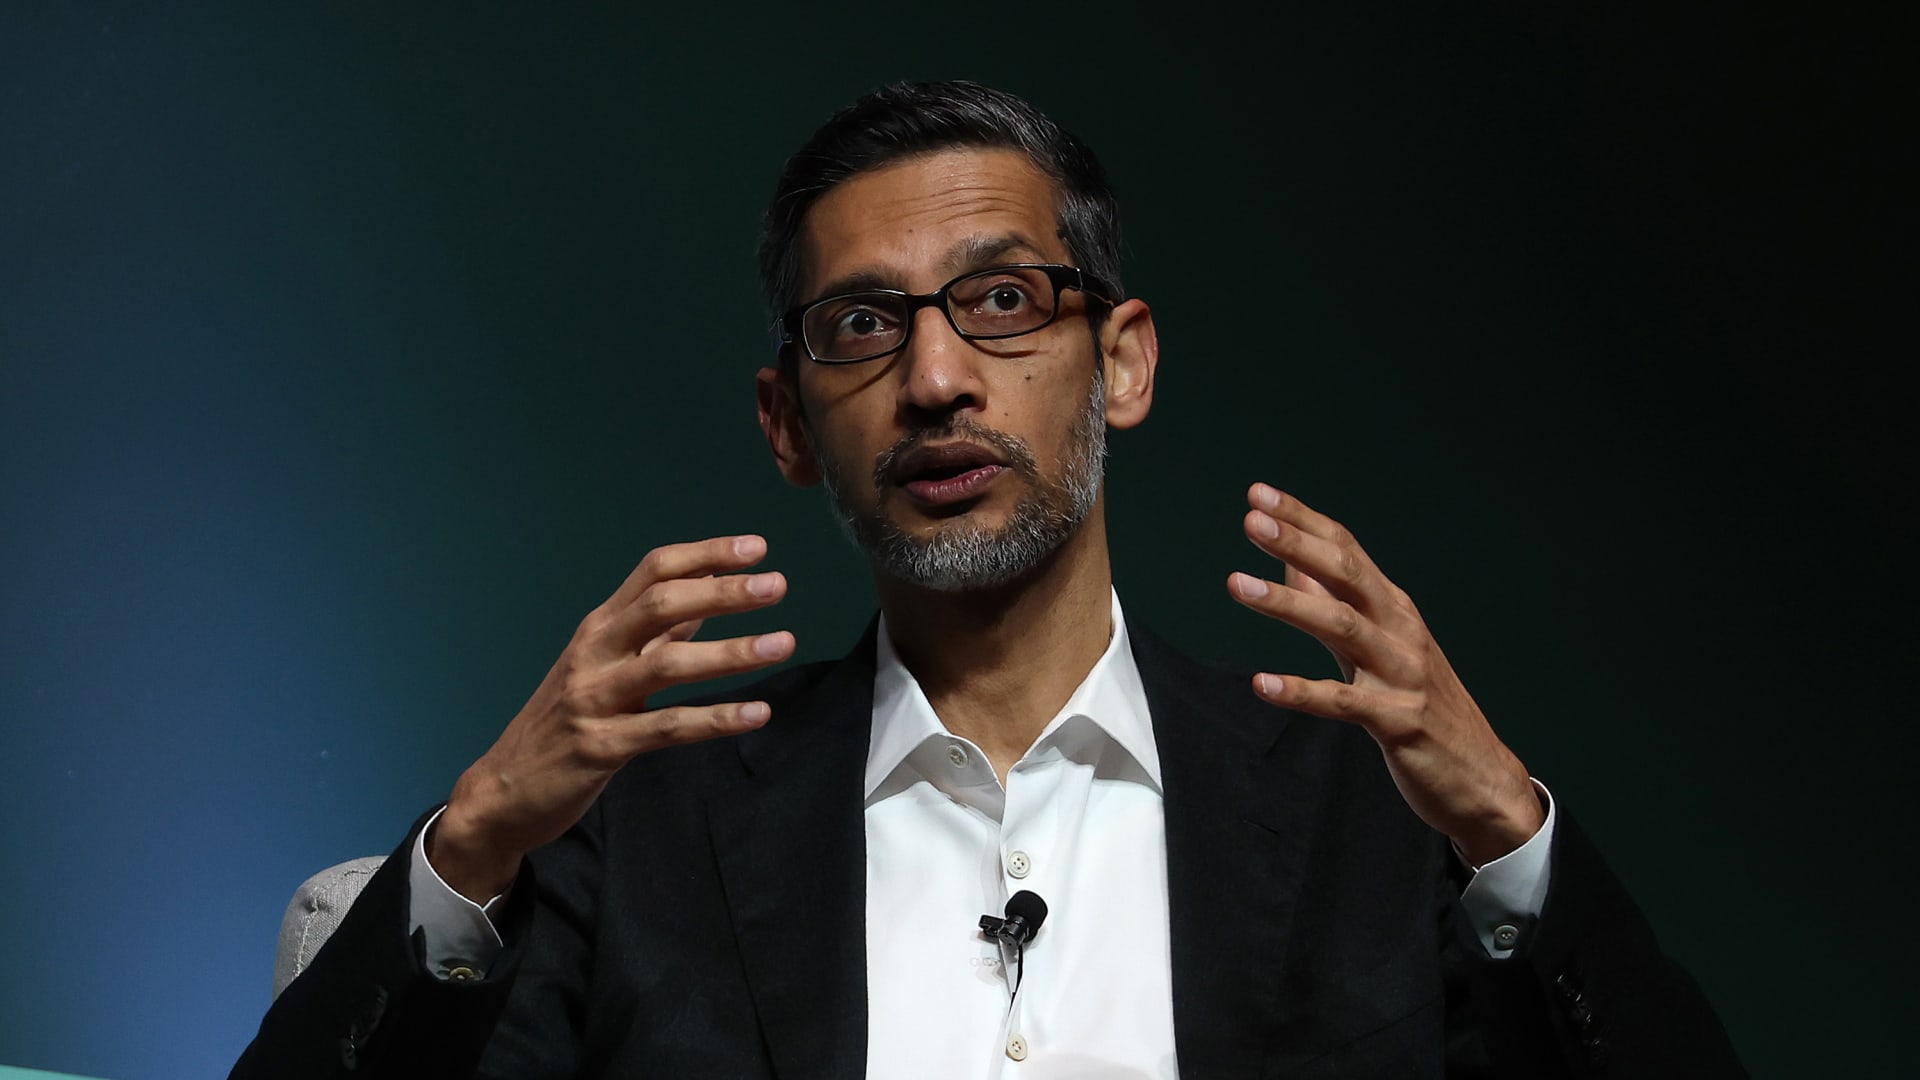 Google lays off hundreds of 'Core' employees, moves some positions to India and Mexico - CNBC